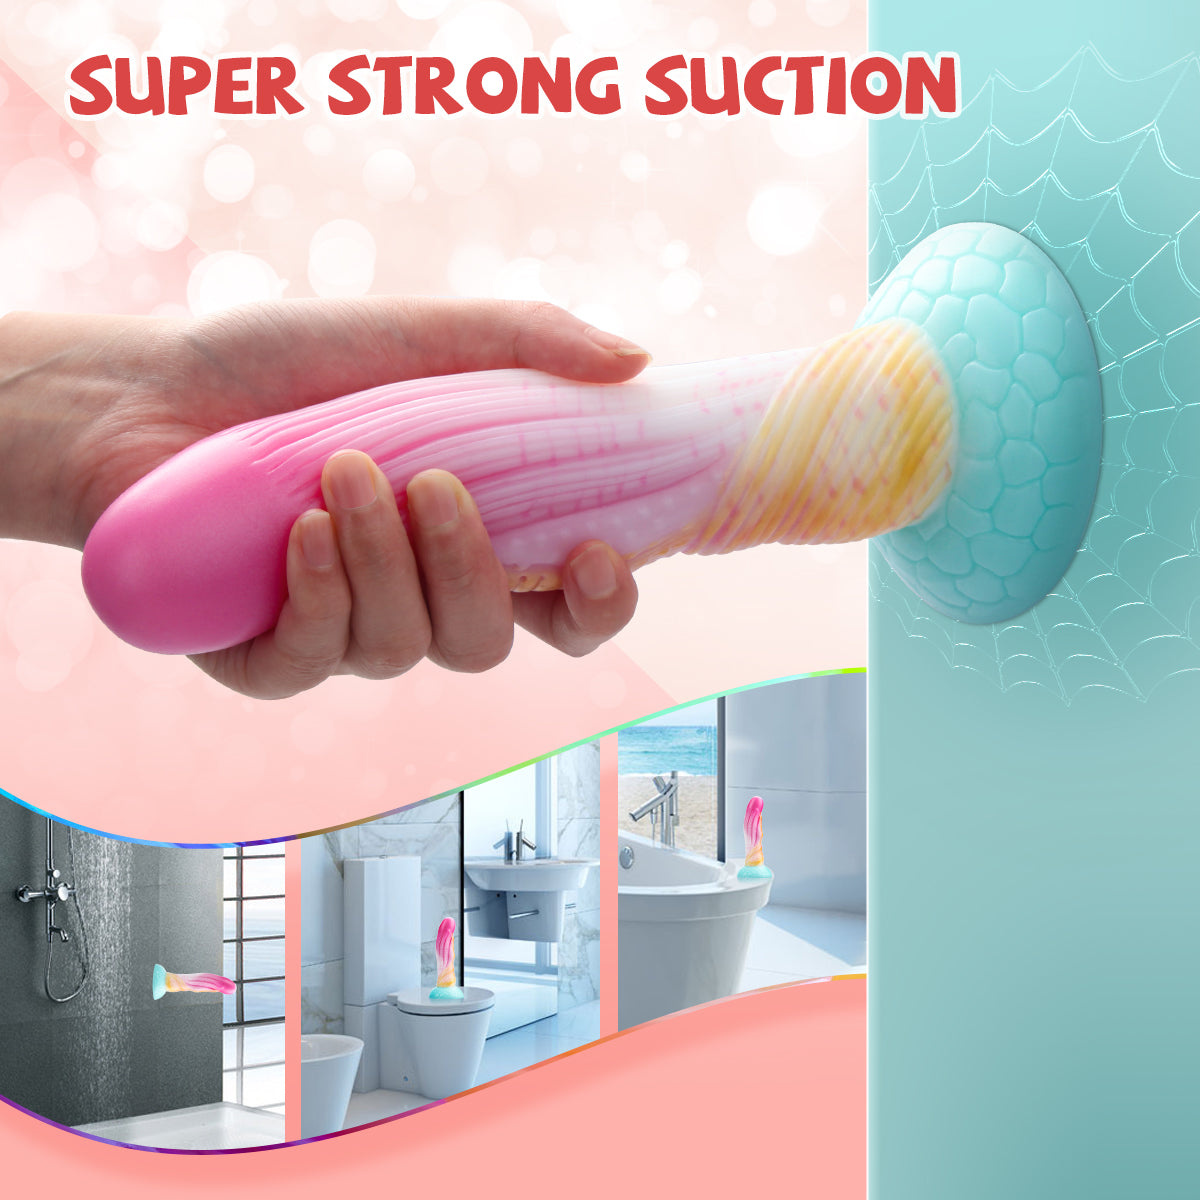 8.5" Fantasy Dildo, Areskey Ultra-Soft Monster Dildos with Large Suction Cup for Hands-Free Play, Lifelike Thick Dragon Dildo Harness Compatible Sex Toys for Men, Women G-spot & Anal Play